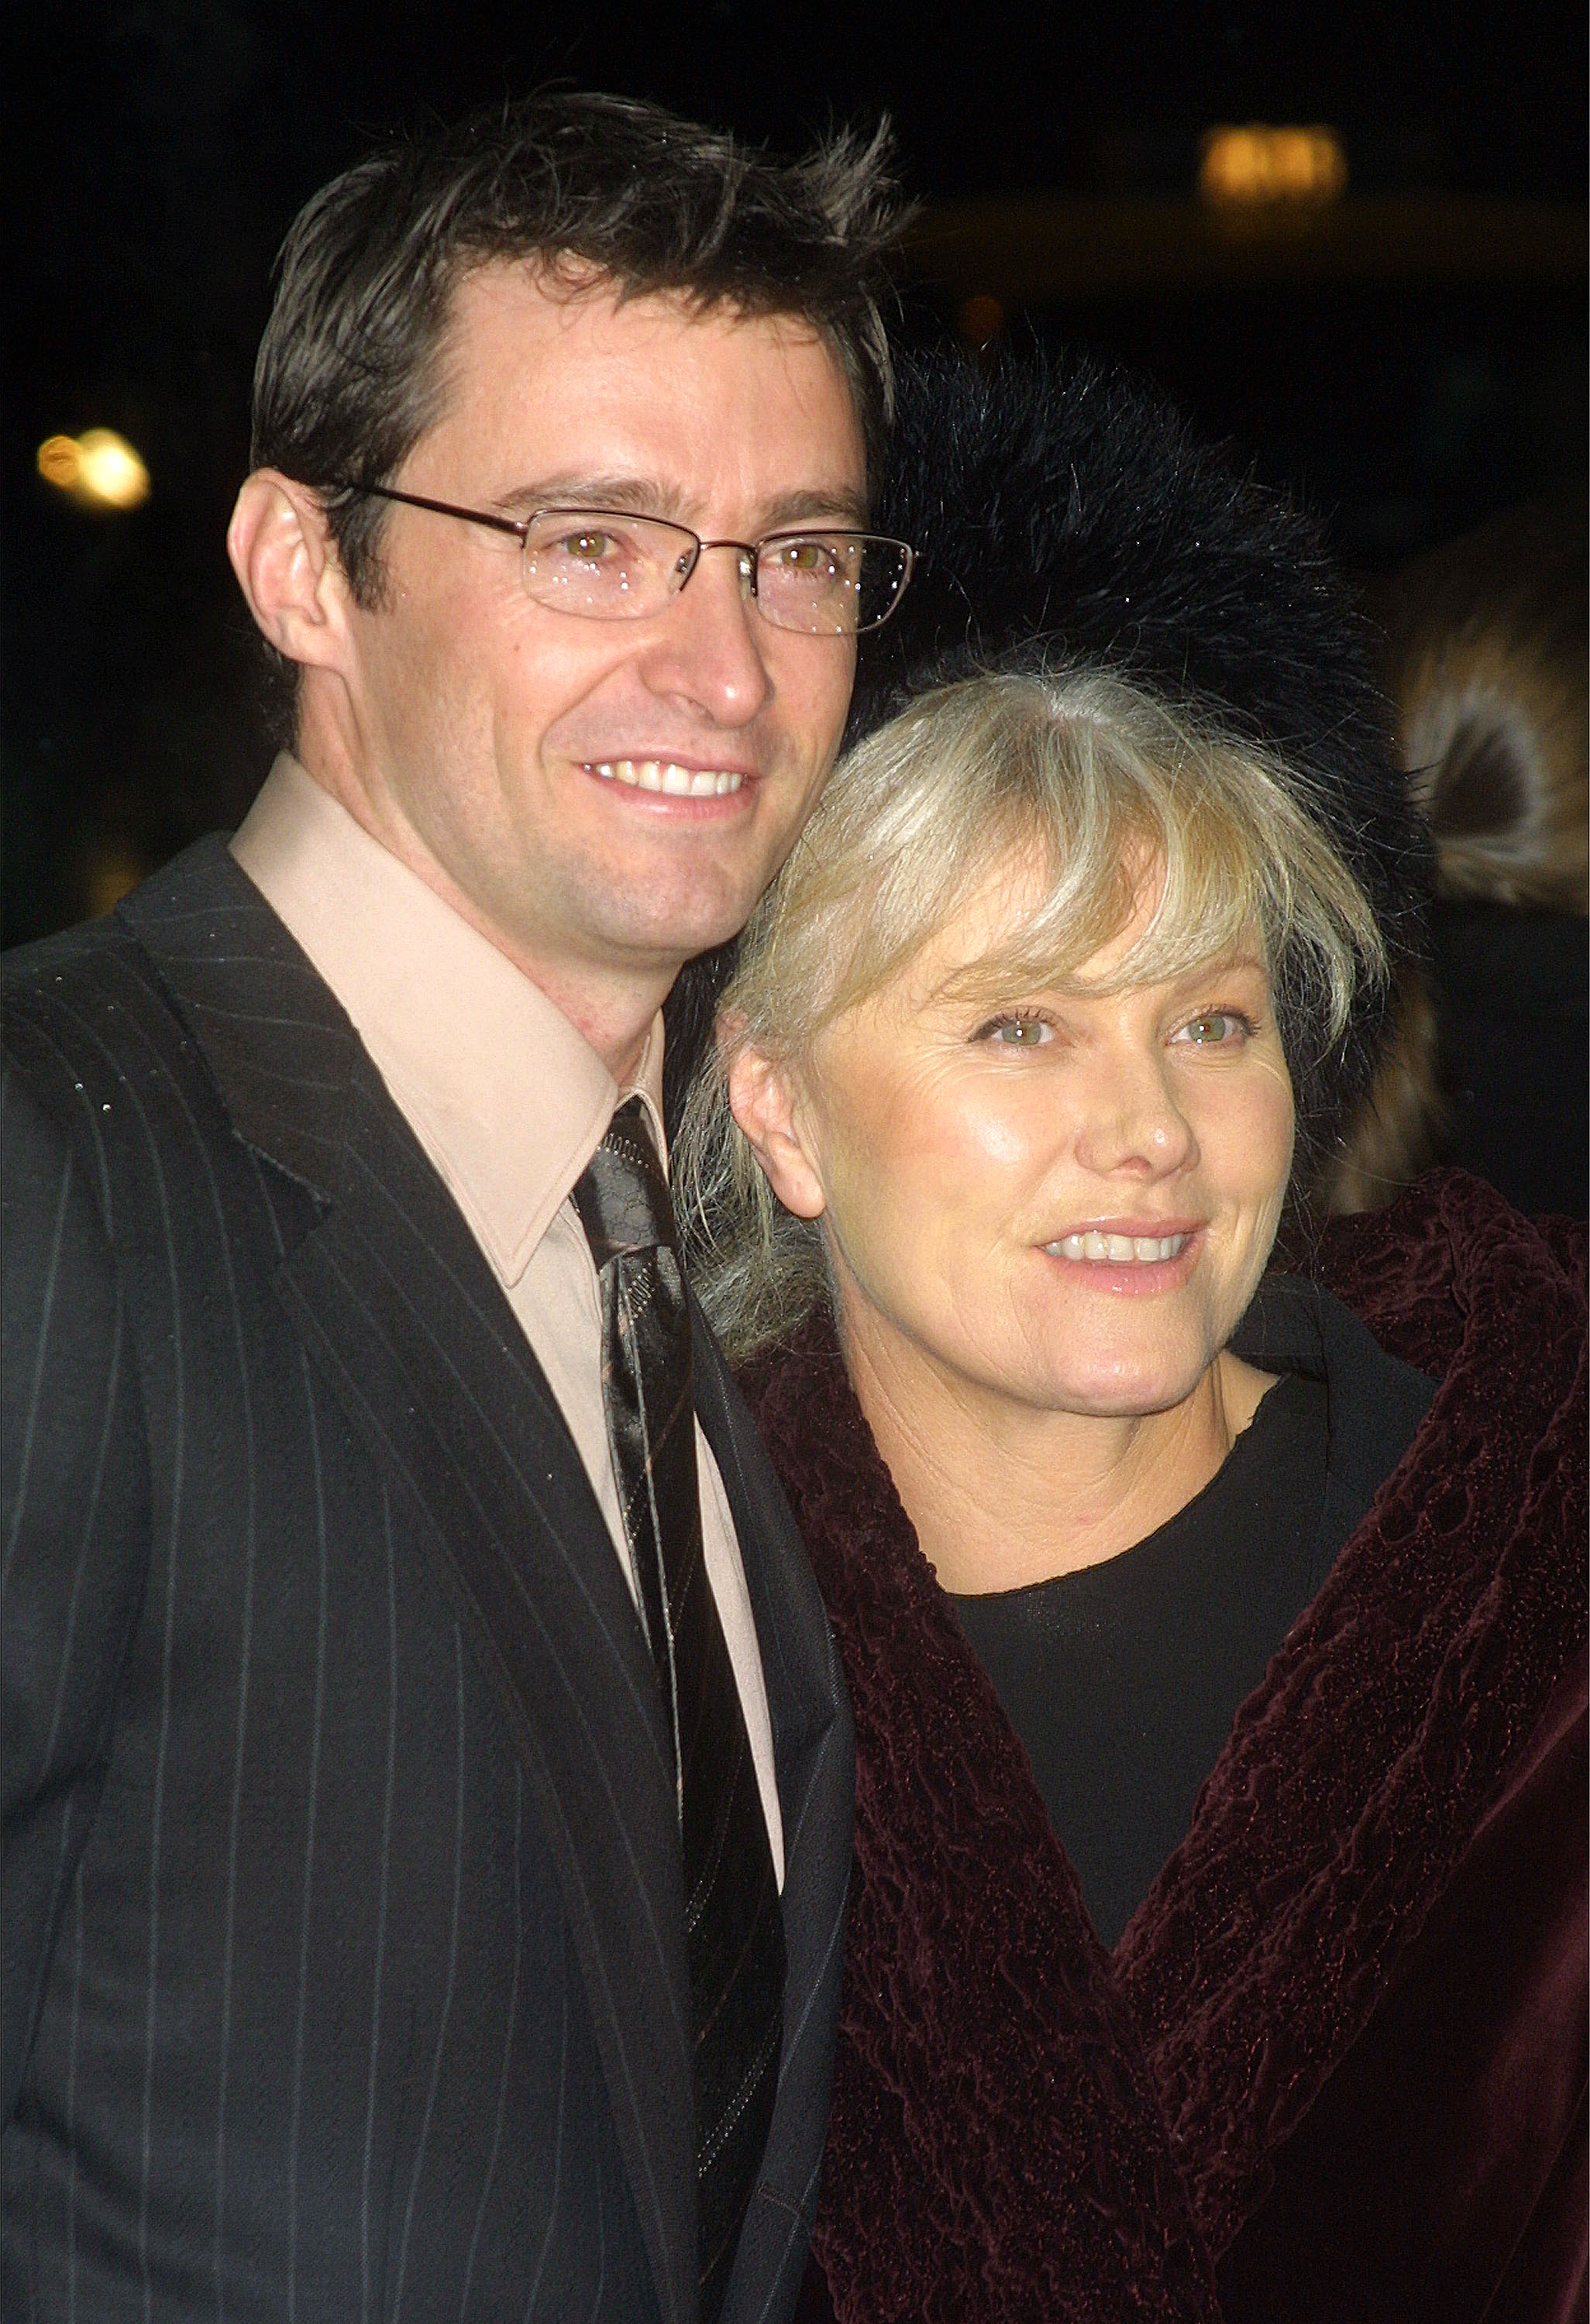 Hugh Jackman and his wife Deborah Furness in New York in 2003 | Source: Getty Images